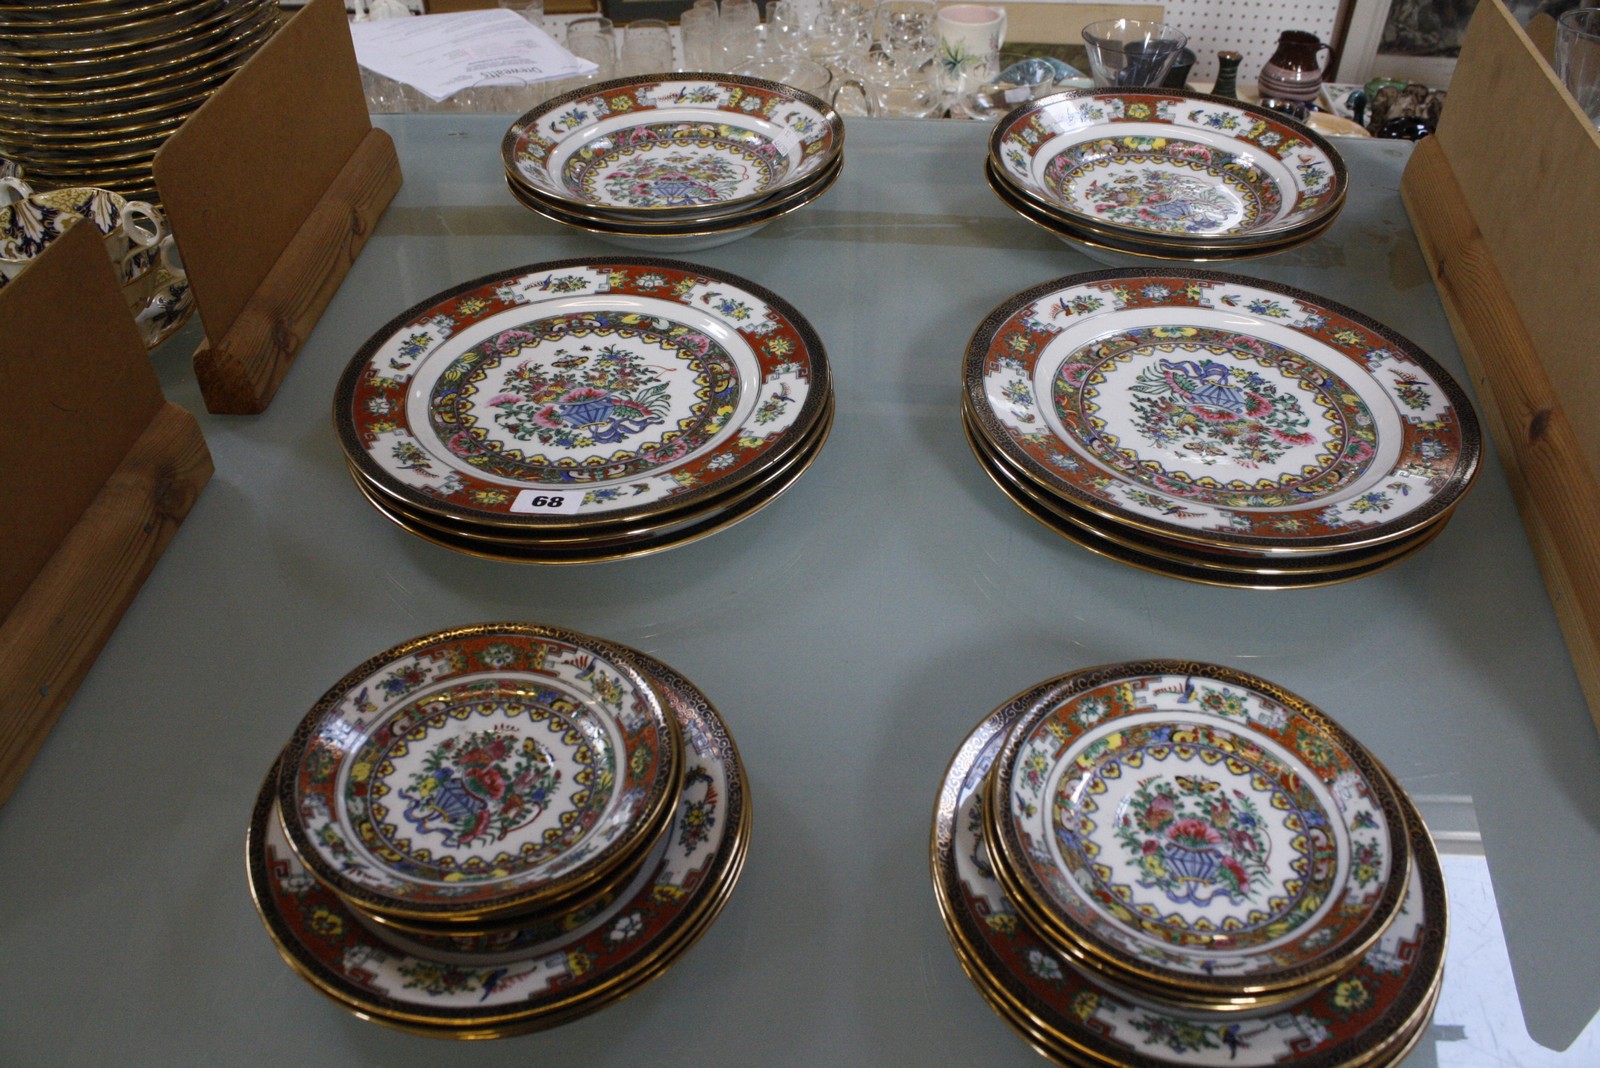 A Modern Chinese part dinner service to include plates, bowls and saucers, floral and butterfly